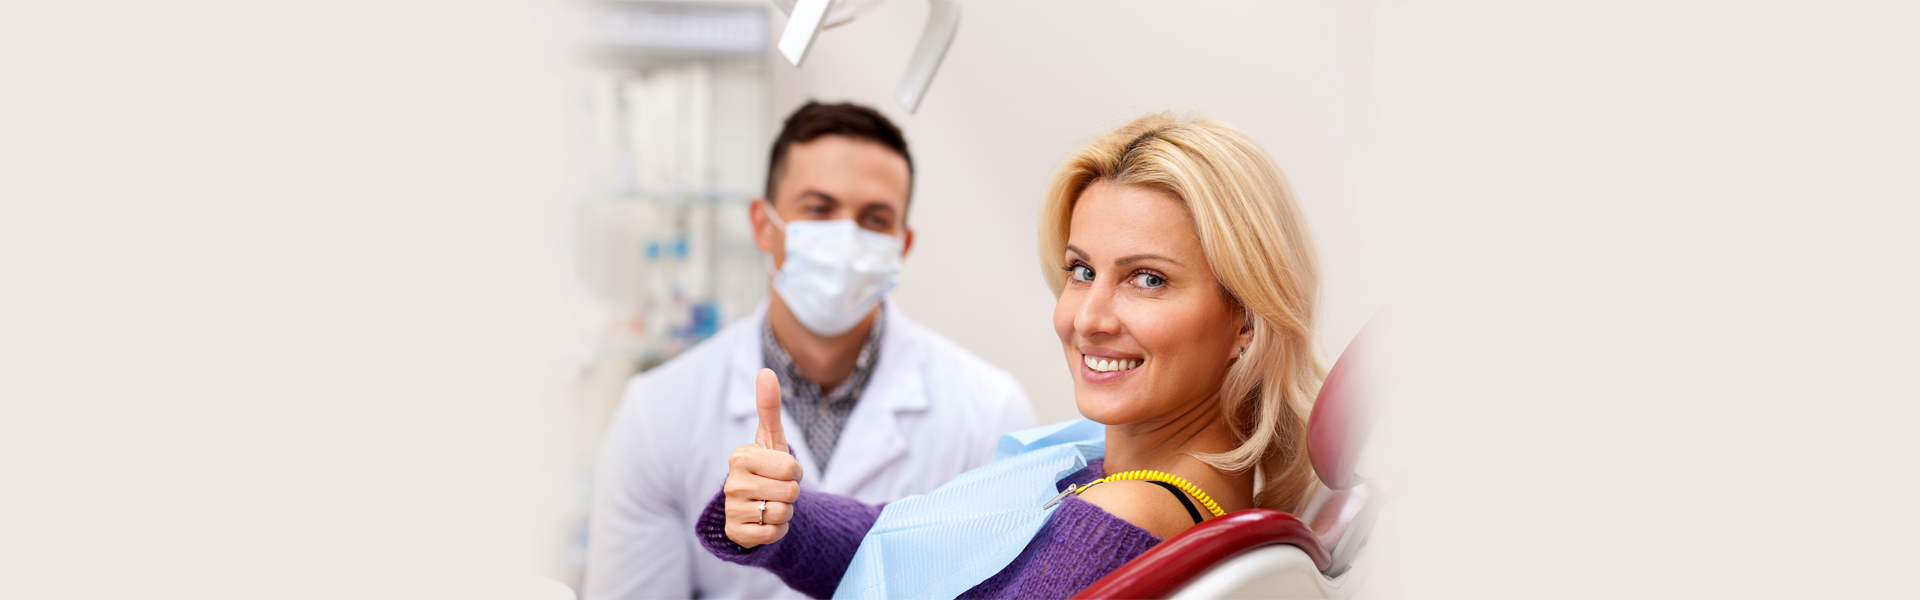 Tips And Suggestions From Your Trusted Dentists In Calgary, AB